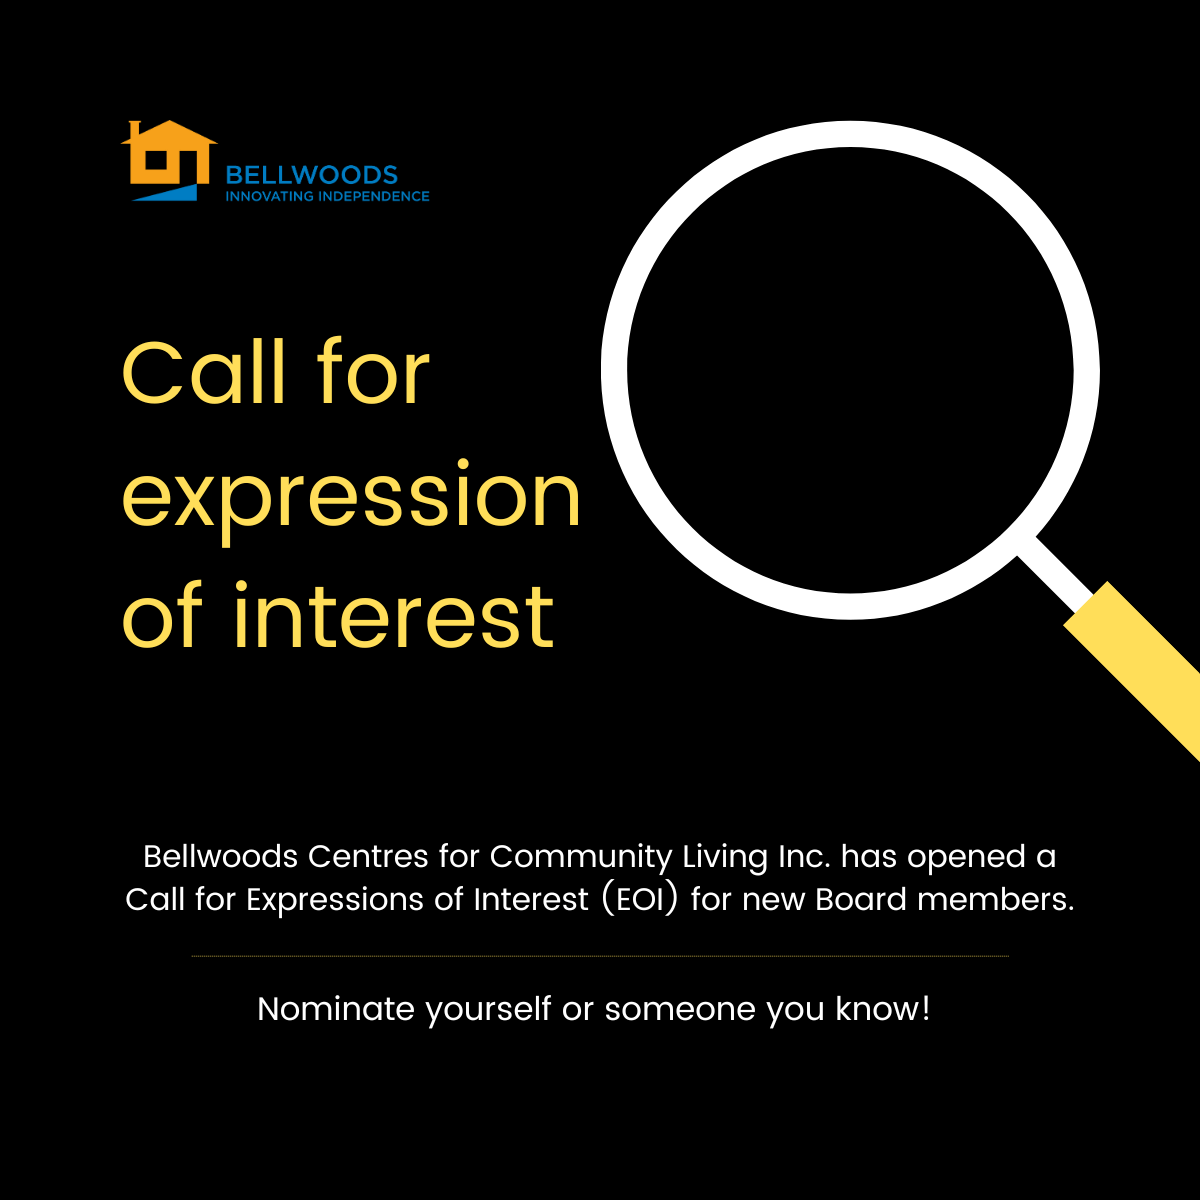 Call for Nominations/Expressions of Interest